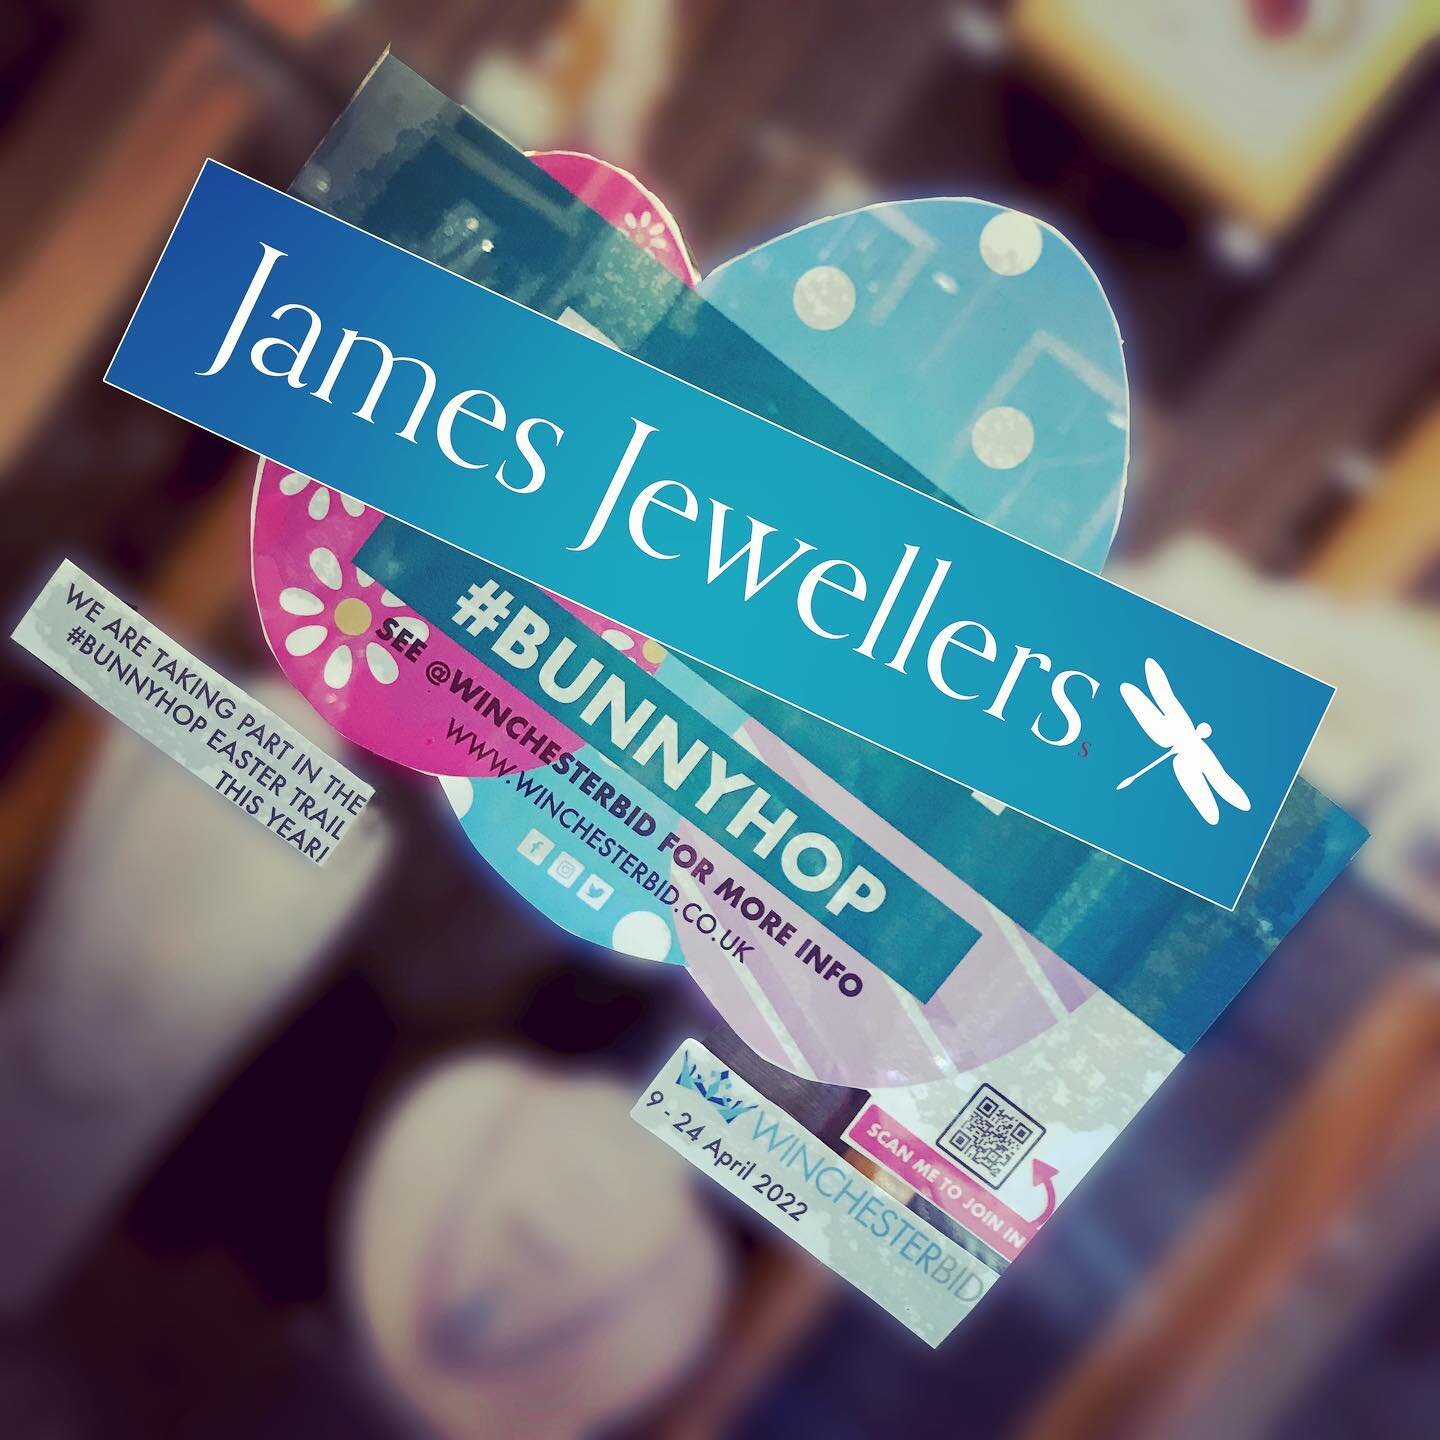 Hop along to see us to collect one of the nine #BUNNYHOP Easter themed words to add to your trail sheet! You may fine a hint in our Easter jewellery photos. 😉 

@winchesterbid 
#winchesterindependents 
#easter 
#handmadejewellery 
#hellowinchester